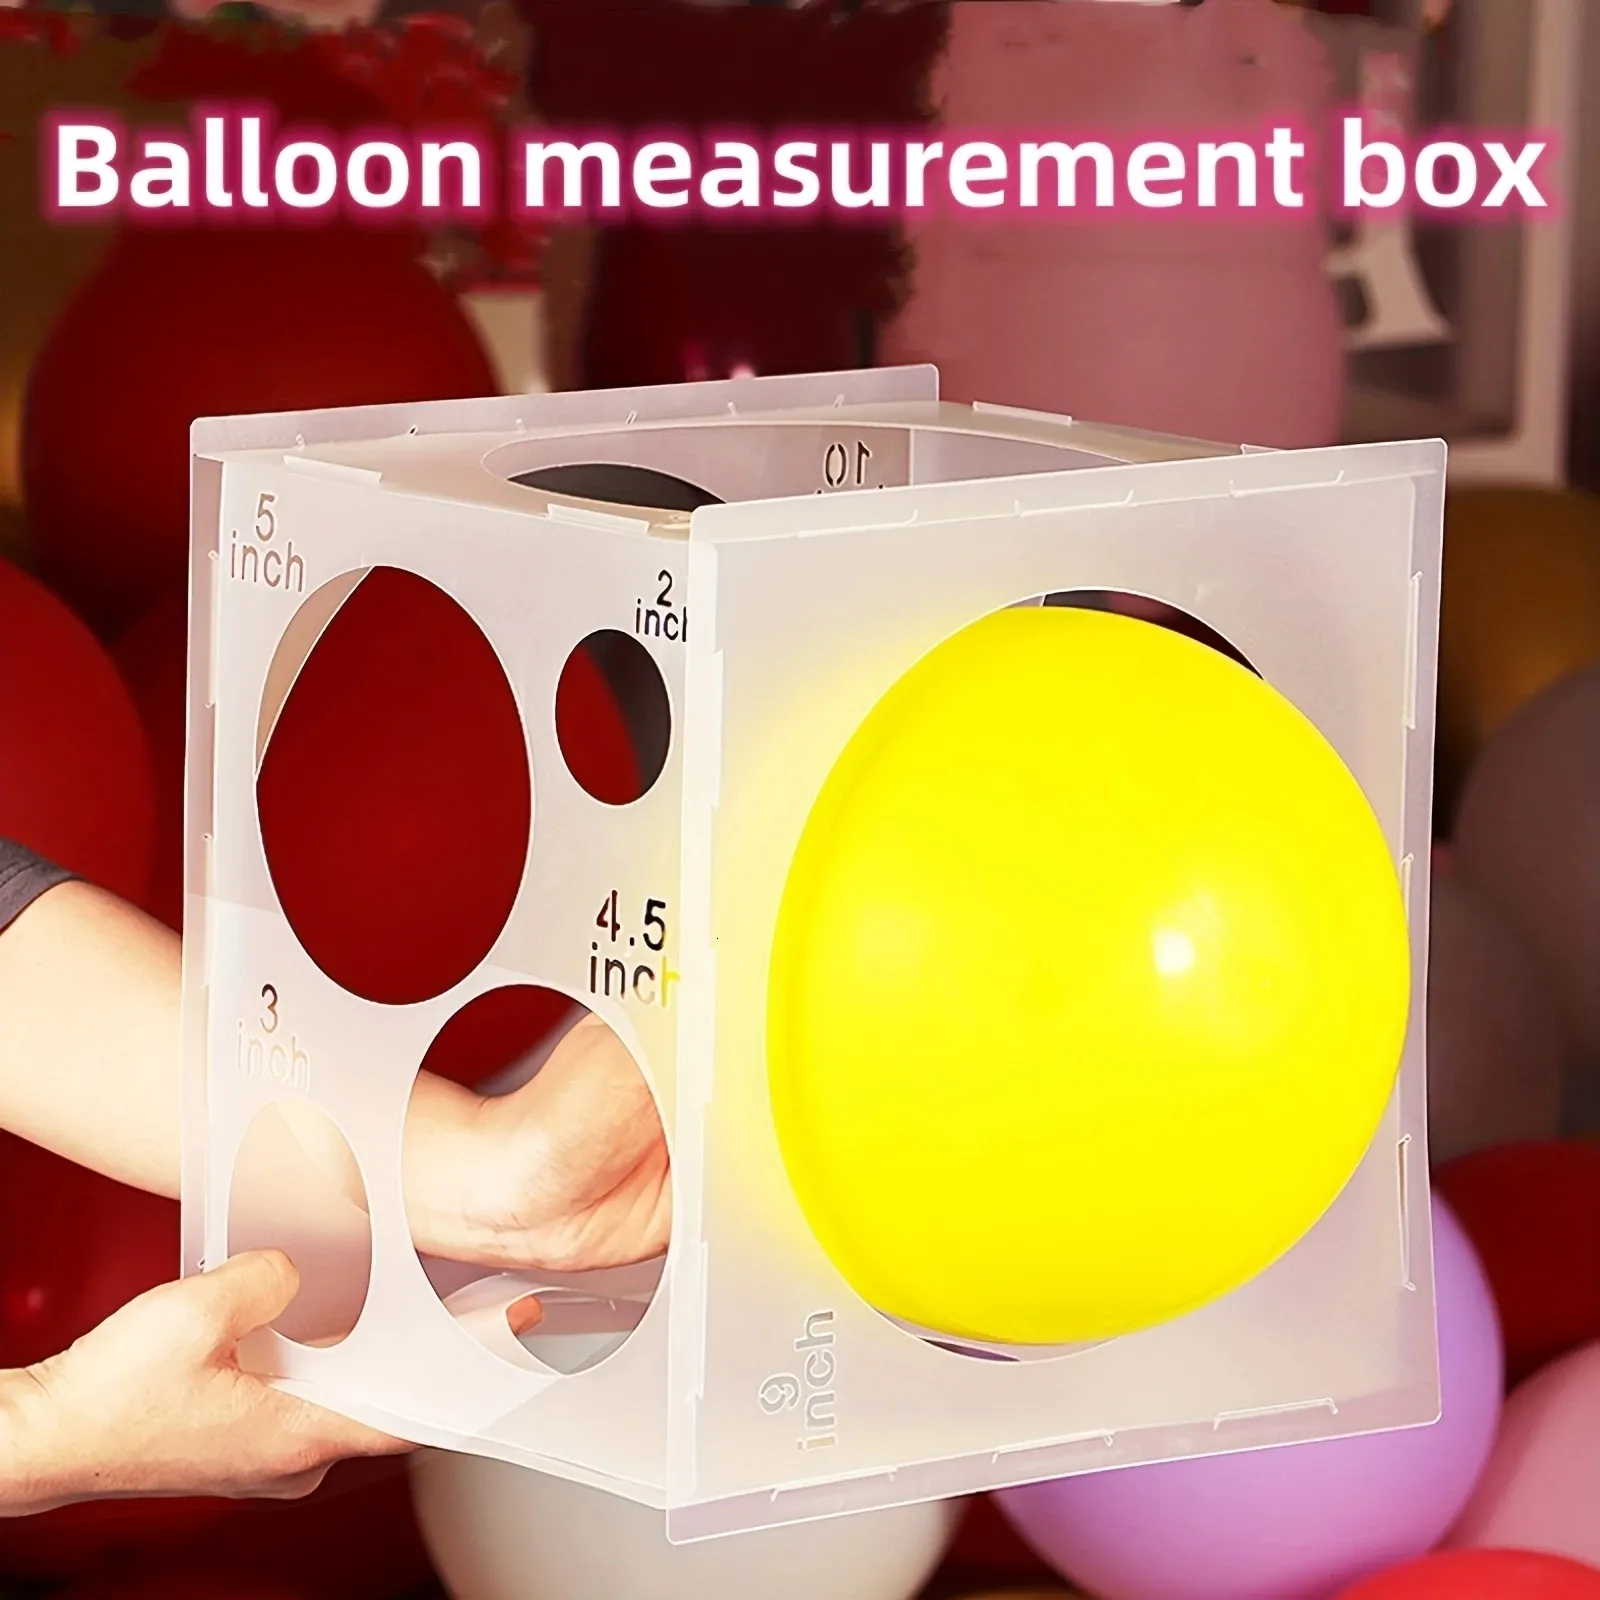 Balloon-measuring-tool-Stick-Knotter-Balloons-Pump-Accessories-Inflator-Birthday-Party-Supplies-Wedding-Decoration